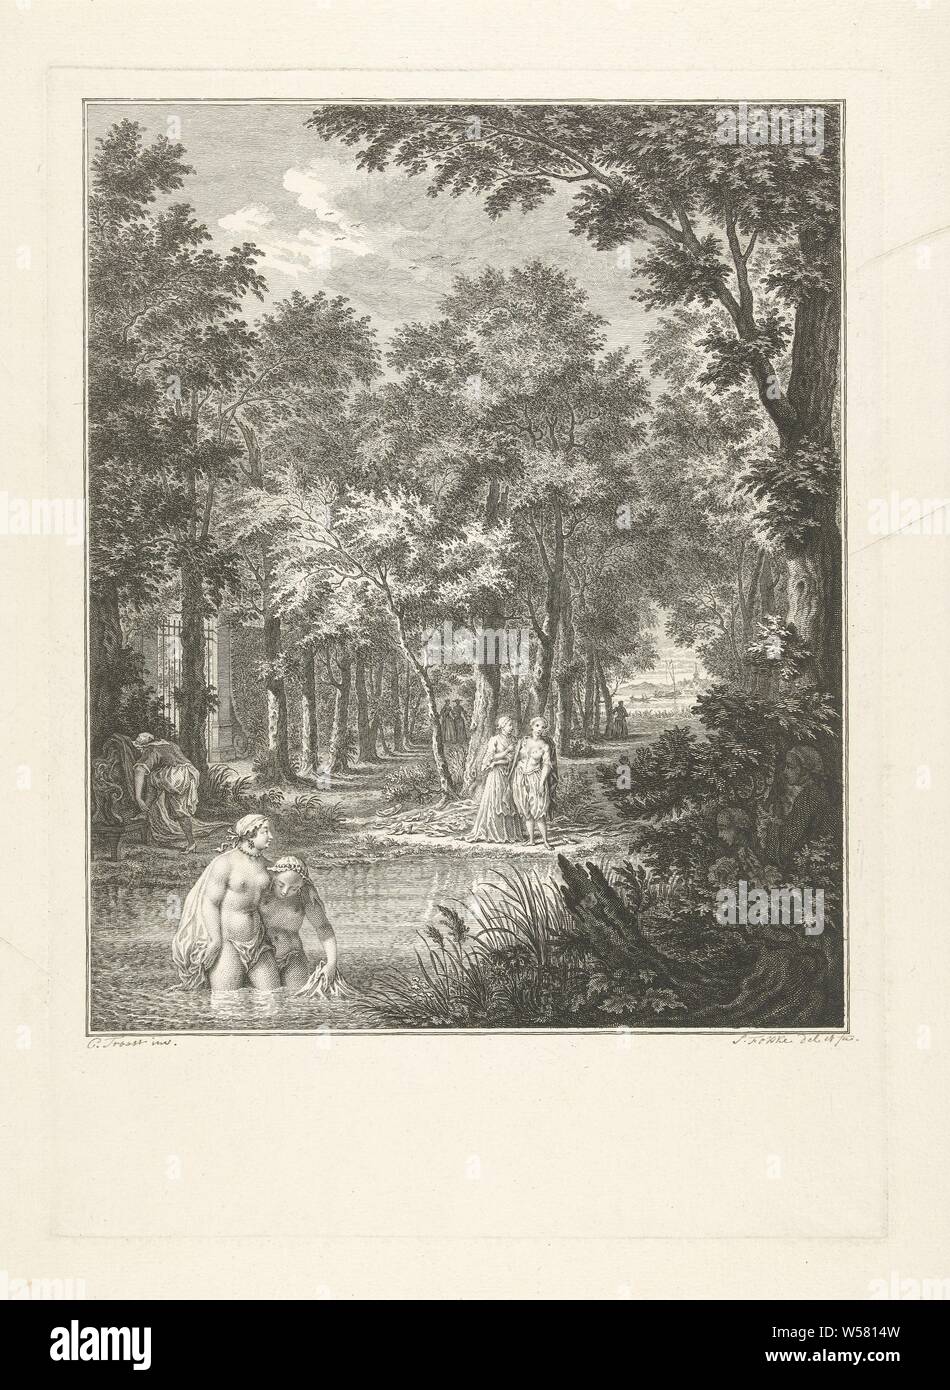 The bathing ladies are spied on, Two bathing ladies are being spied on by two gentlemen in the scrub. In the background a few figures walk among the trees., Washing and bathing, peeping, voyeur, Simon Fokke (mentioned on object), 1722 - 1784, paper, etching, h 379 mm × w 269 mm Stock Photo